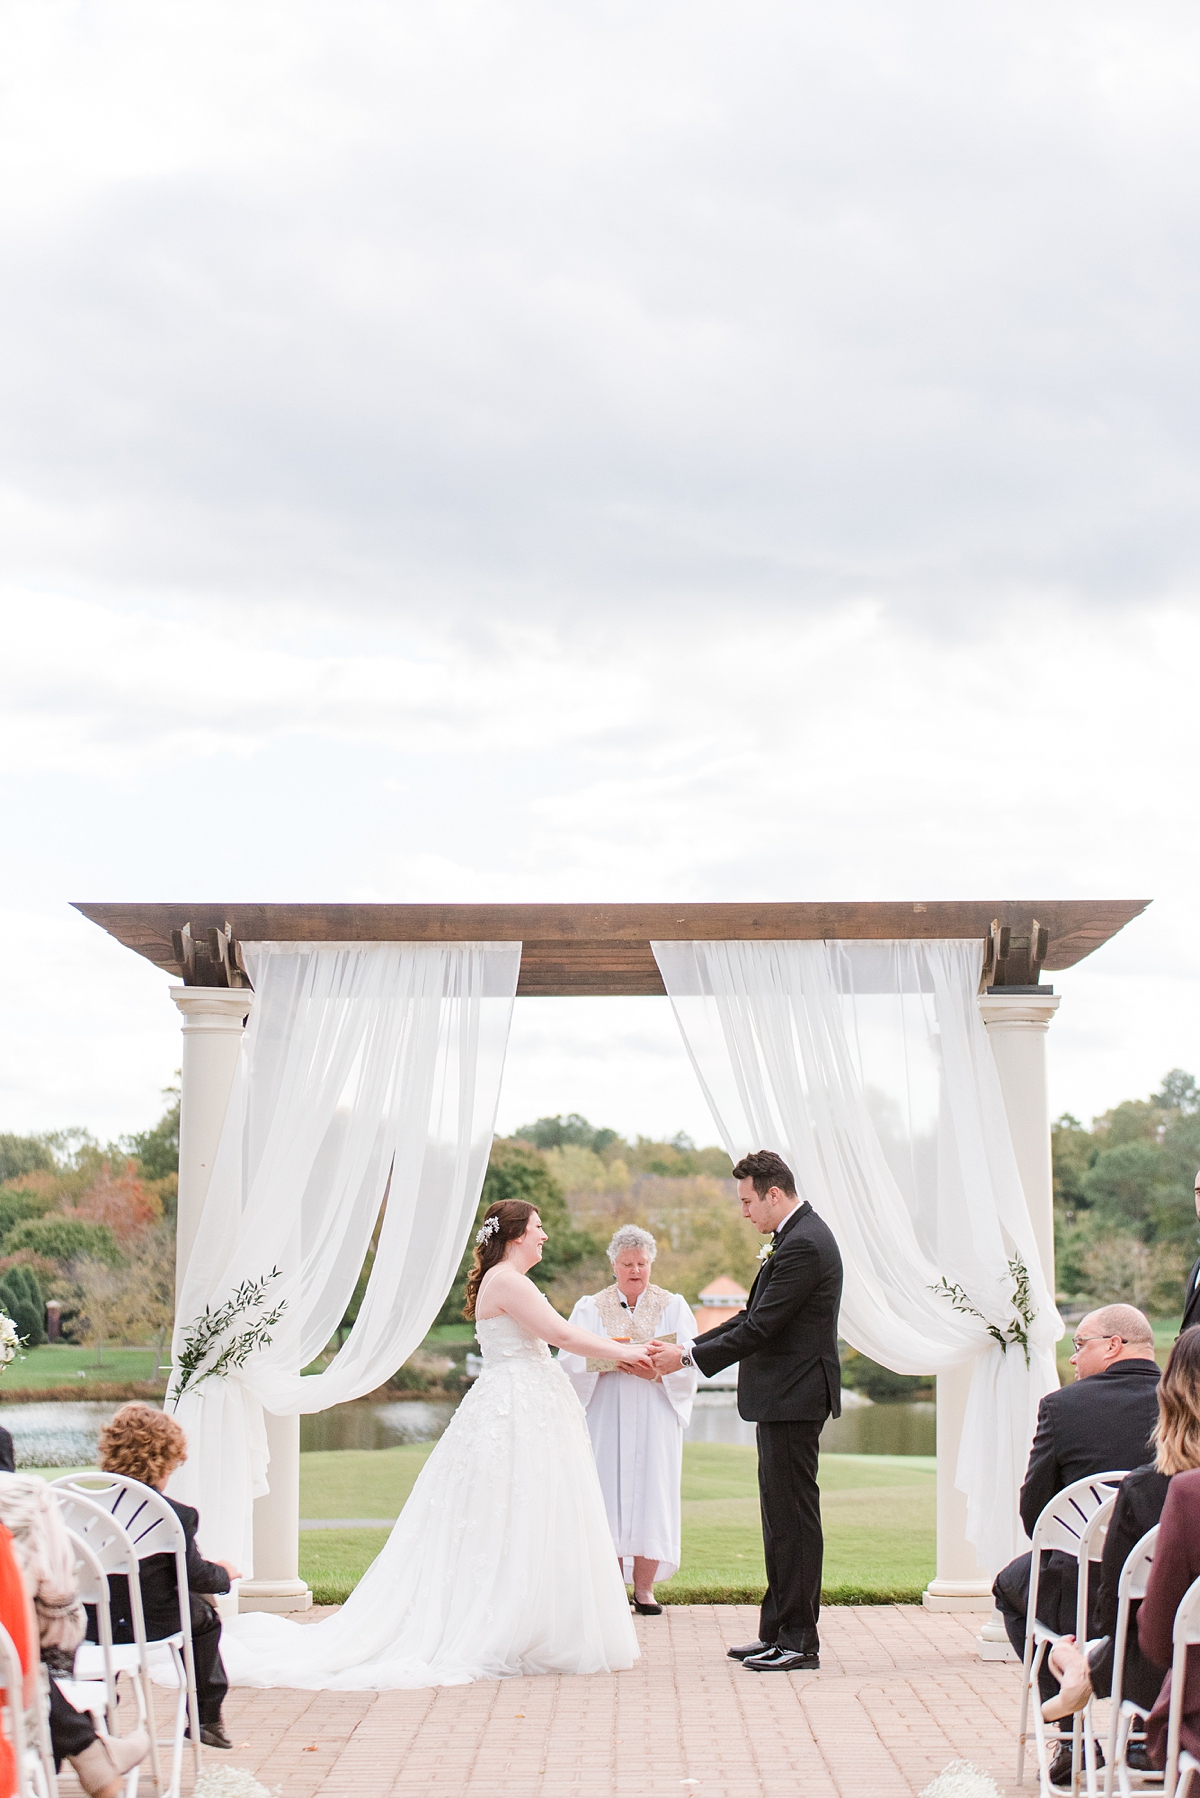 Wedding Ceremony at The Dominion Club. Wedding Photography by Richmond Wedding Photographer Kailey Brianne Photography.